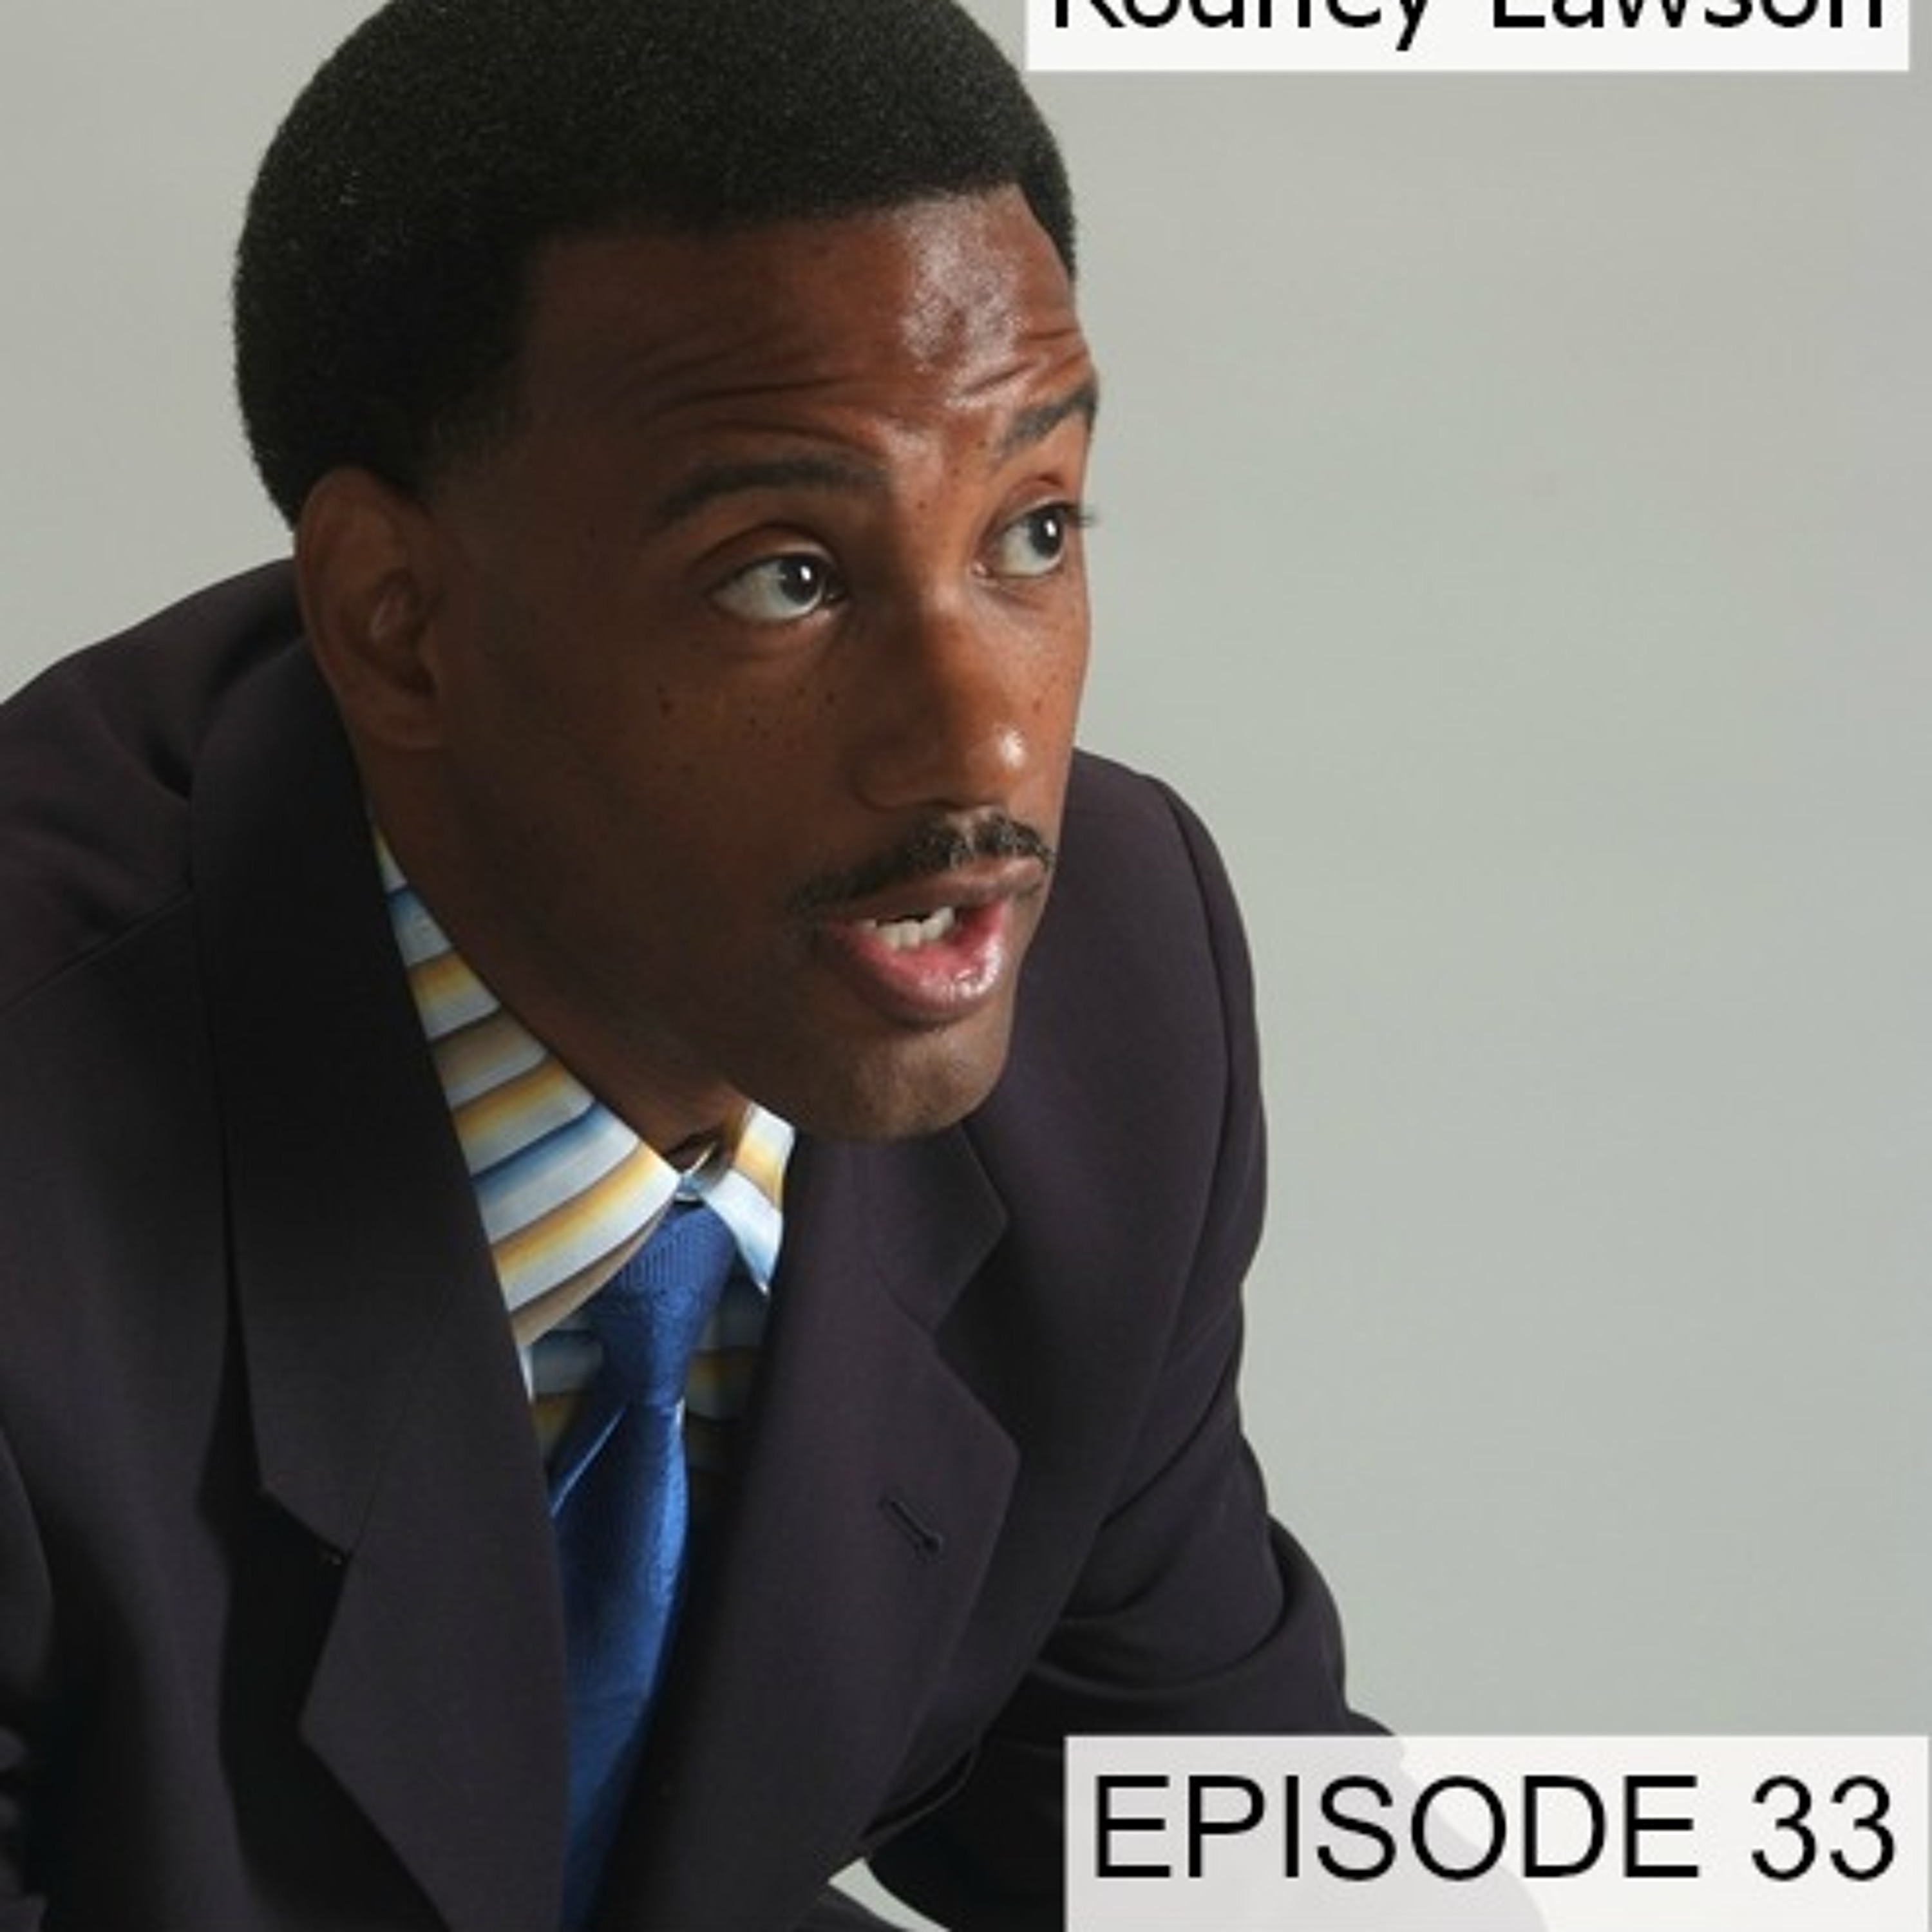 33: Rodney Lawson: CEO of LeXmos, Inc., A Leader of Leaders Shares His Journey